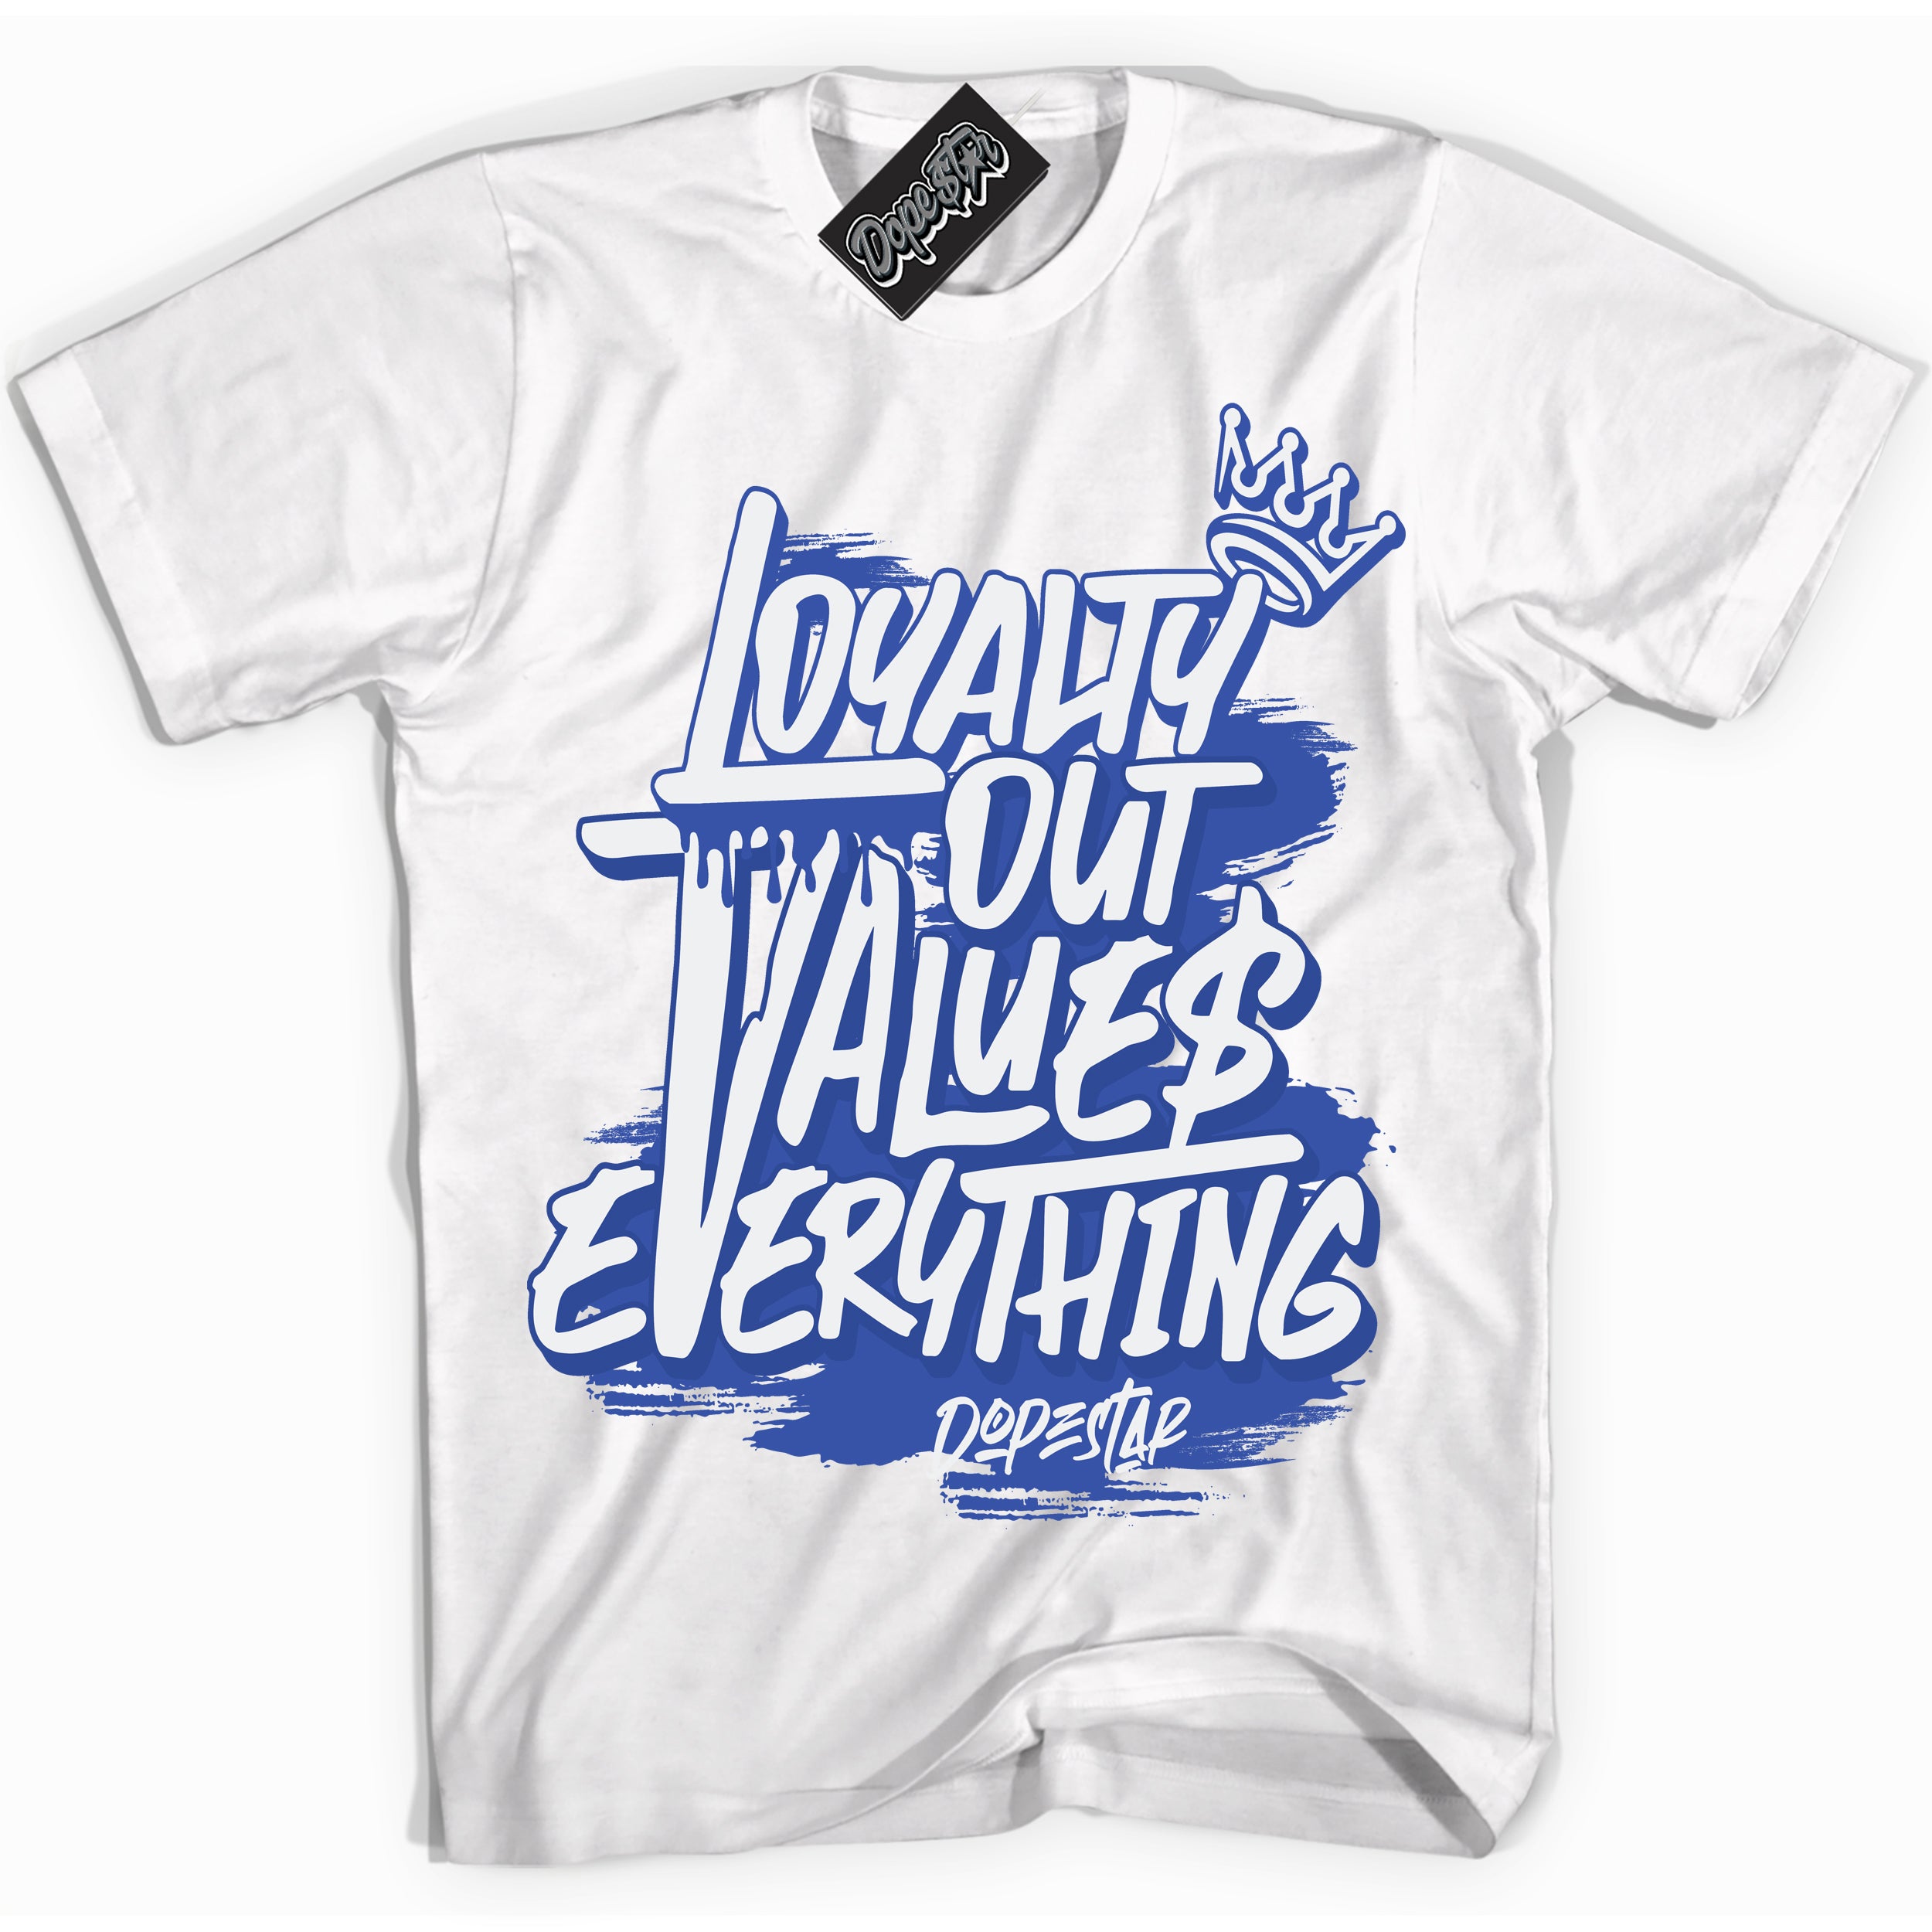 Cool White Shirt with “ Loyalty Out Values Everything” design that perfectly matches Racer Blue Photon Dust Sneakers.